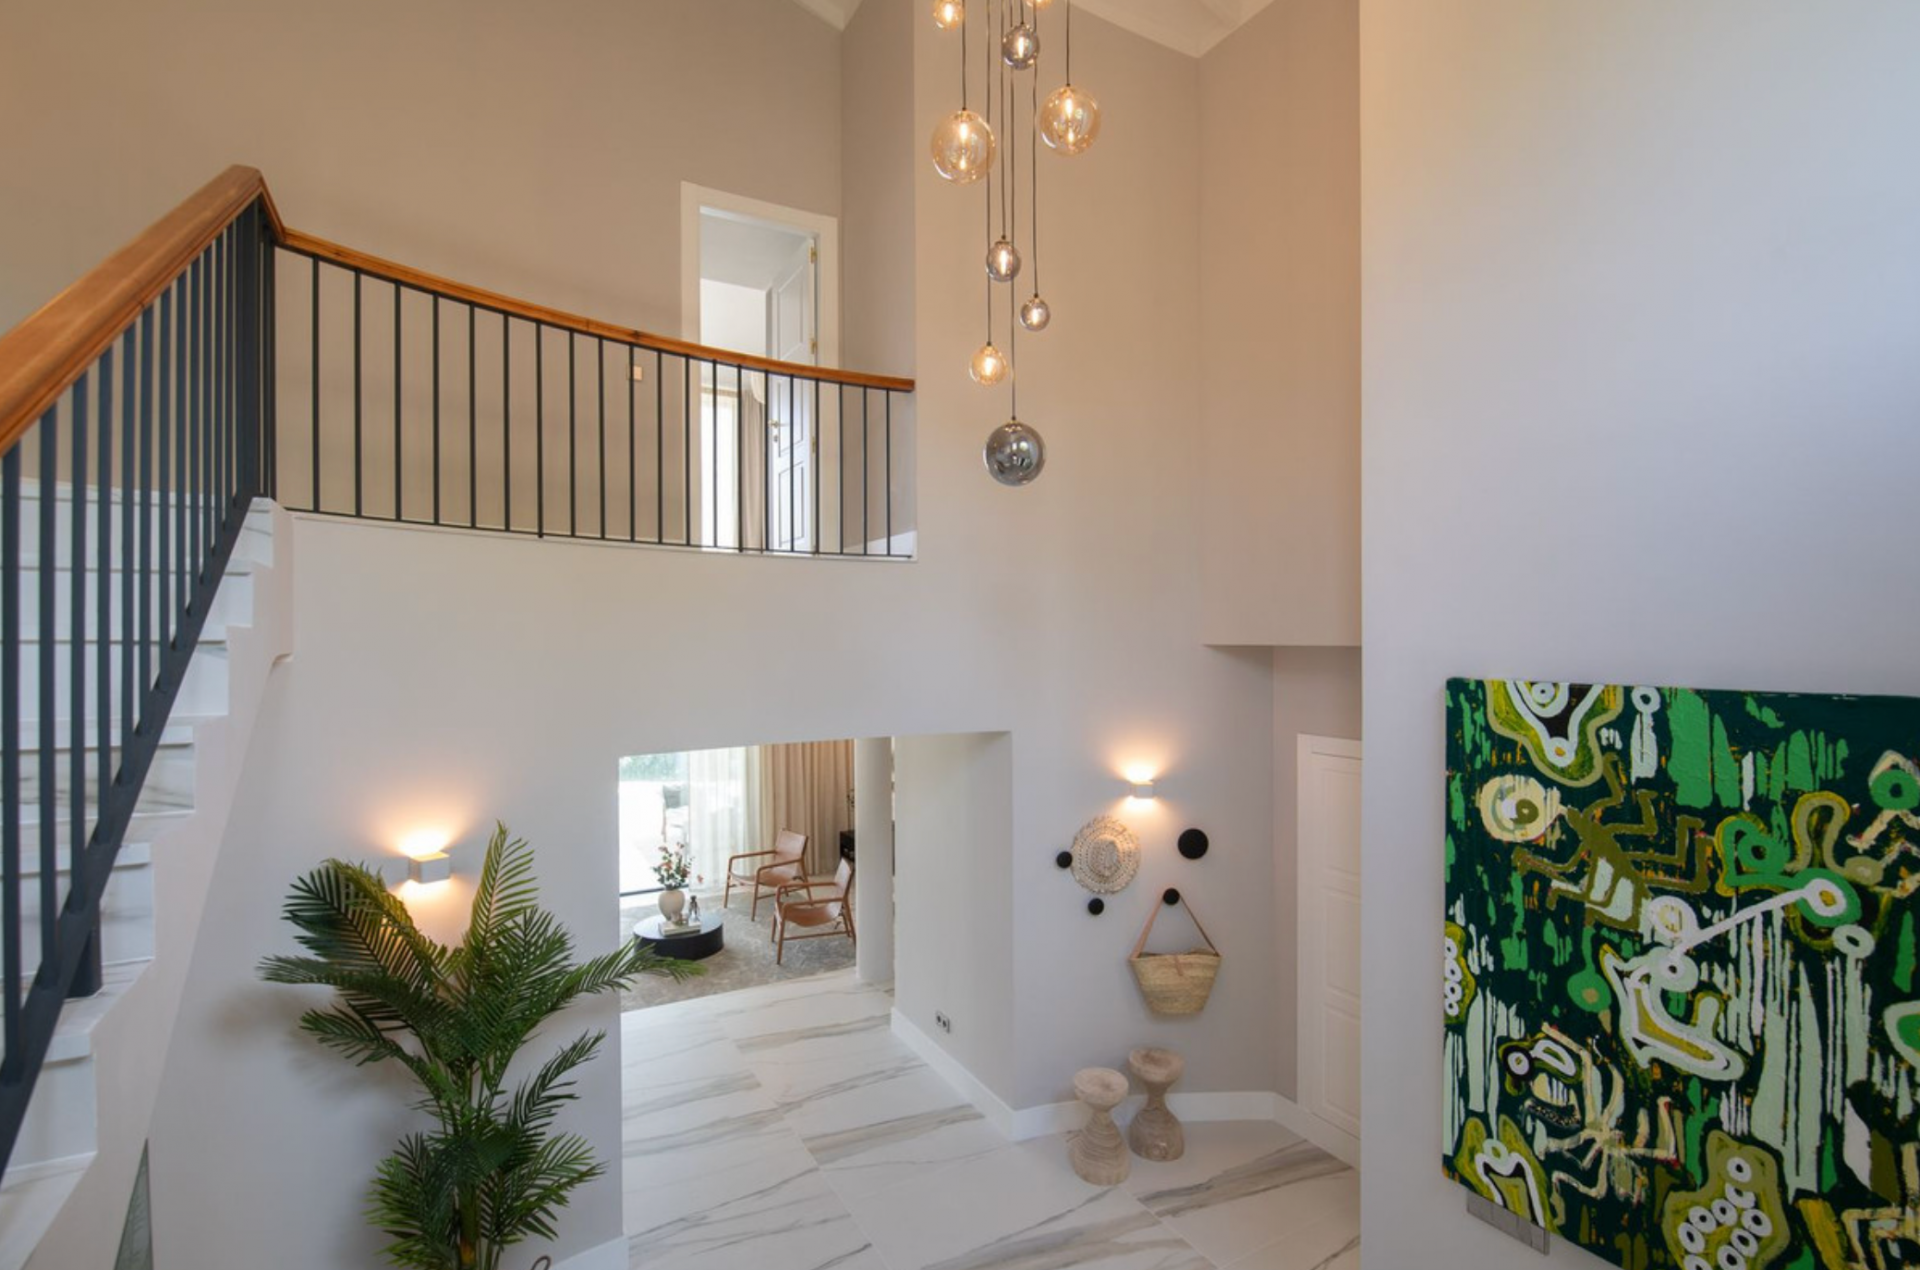 Stunning modern villa completely refurbished and decorated with open views to the sea in El Paraiso